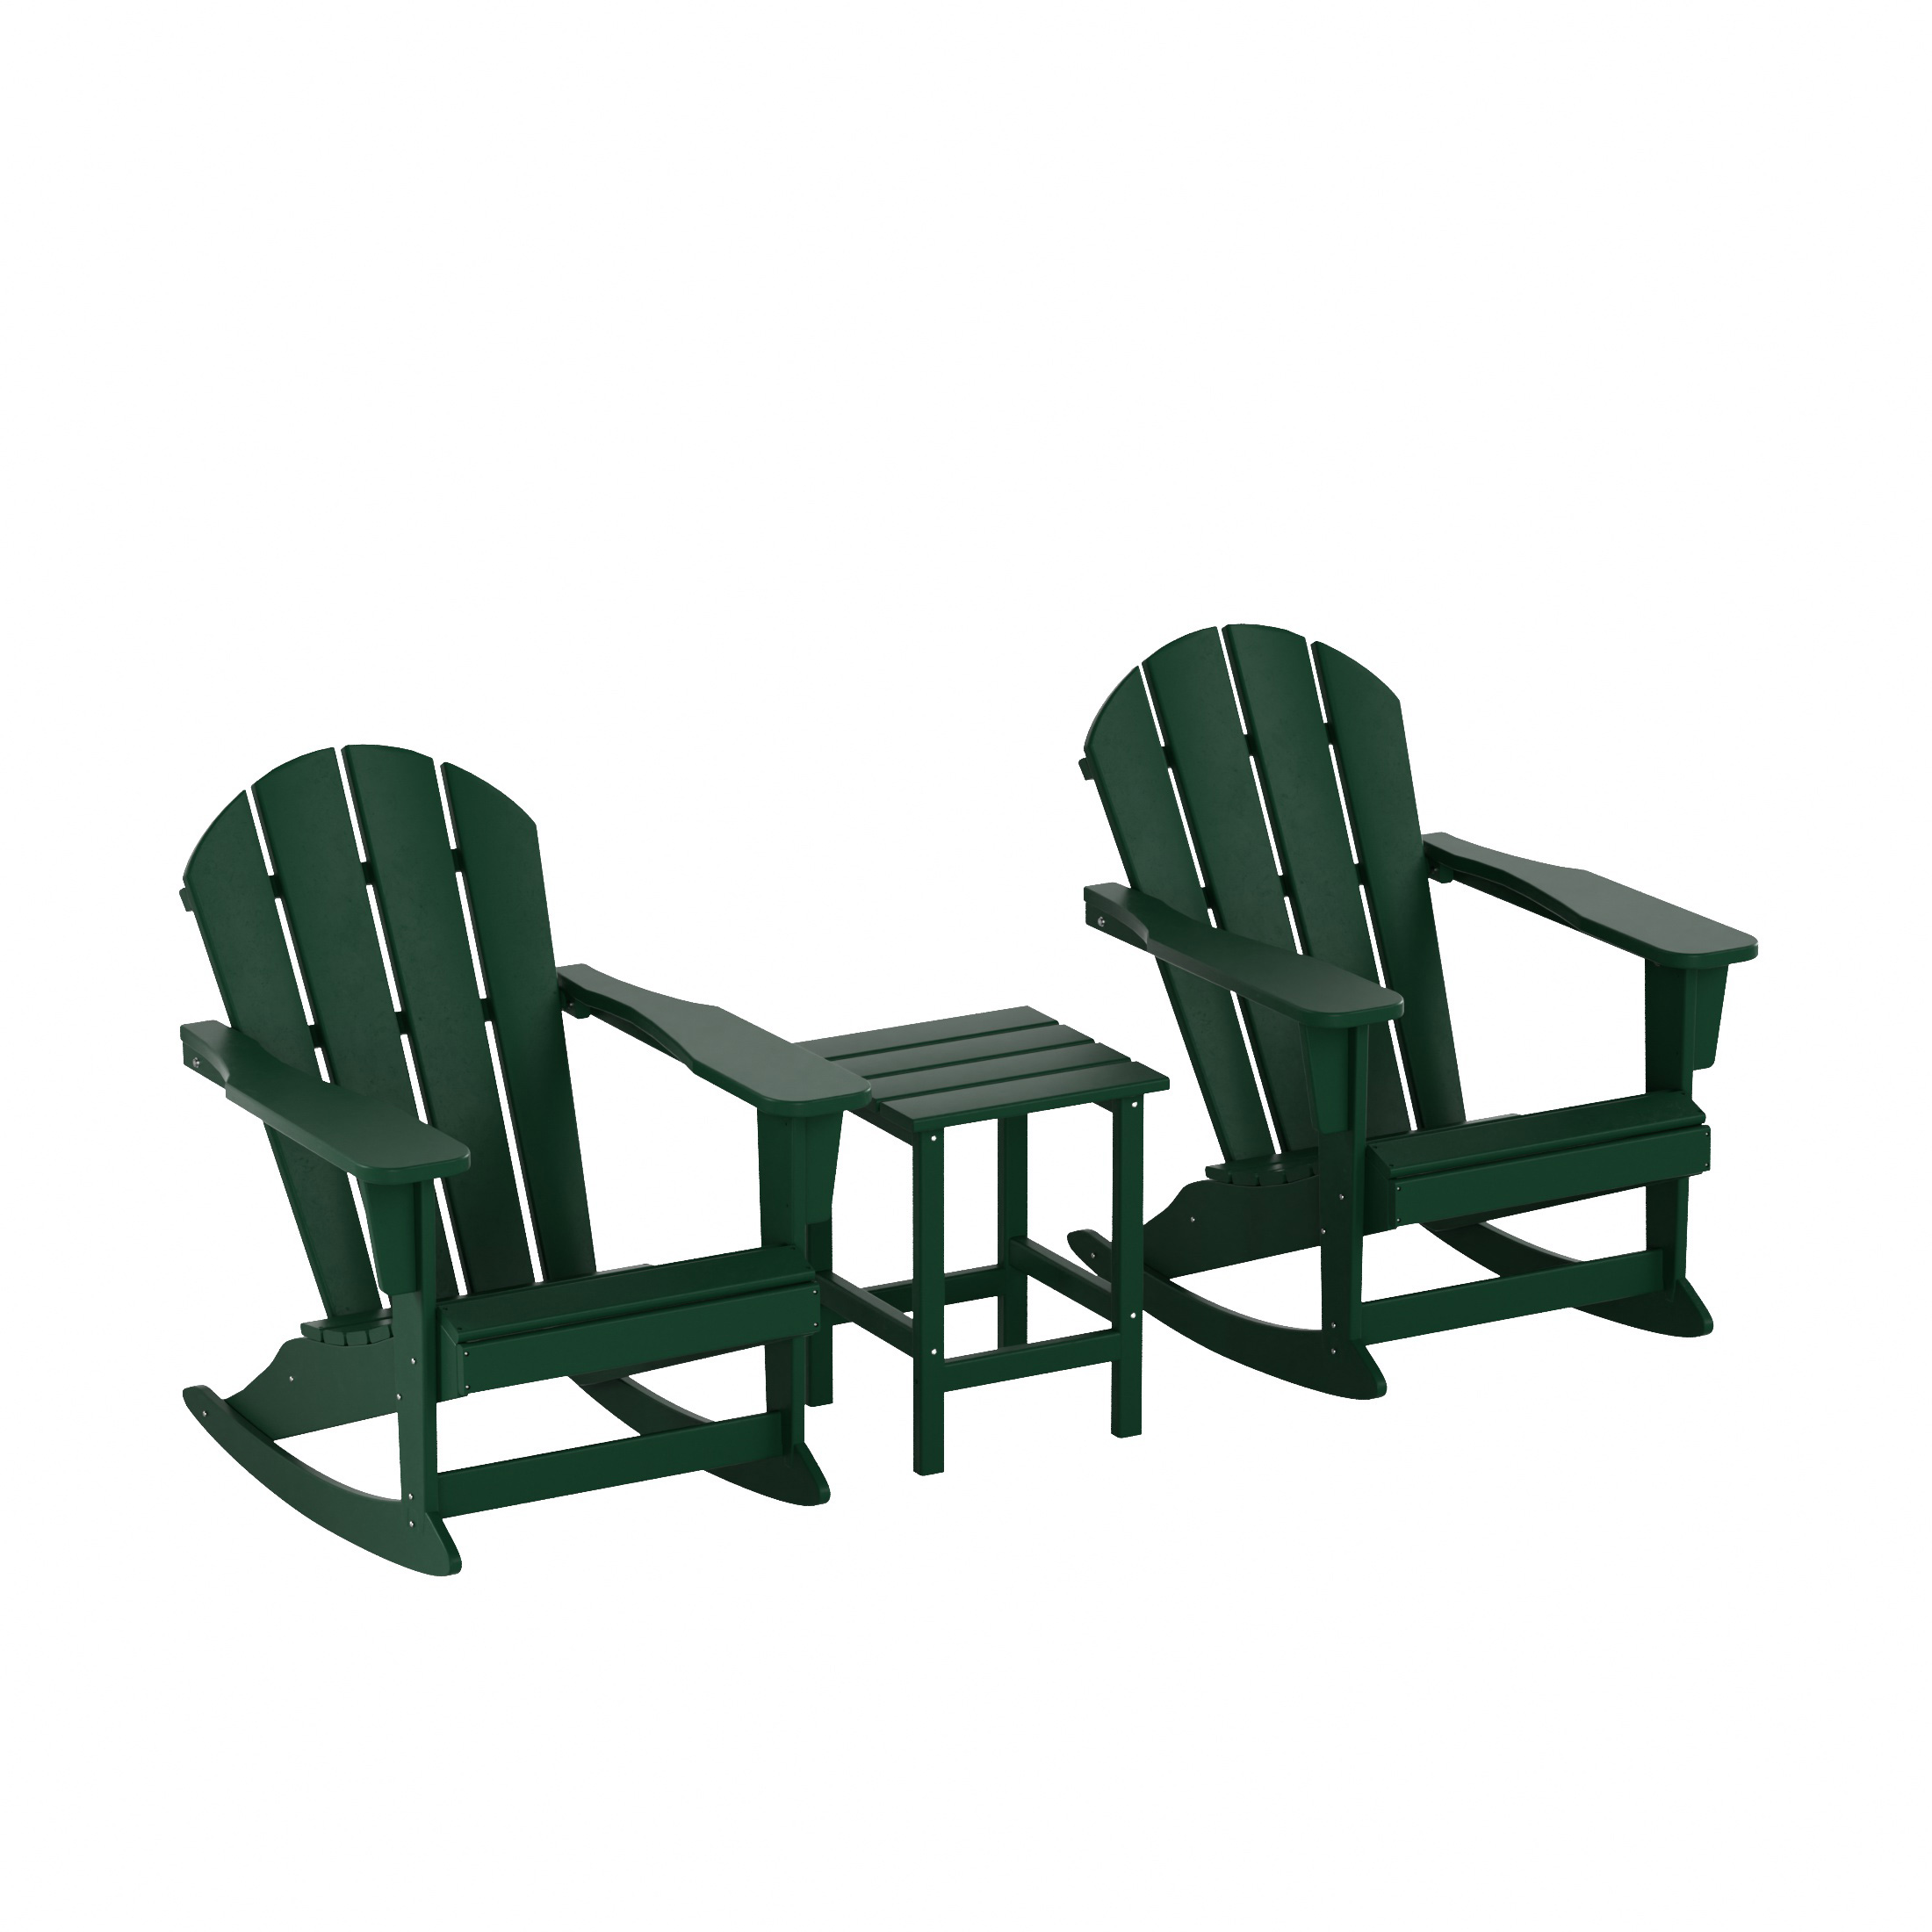 WestinTrends Malibu 3 Piece Outdoor Rocking Chair Set, All Weather Poly Lumber Porch Patio Adirondack Rocking Chair Set of 2 with Side Table, Dark Green - image 1 of 8